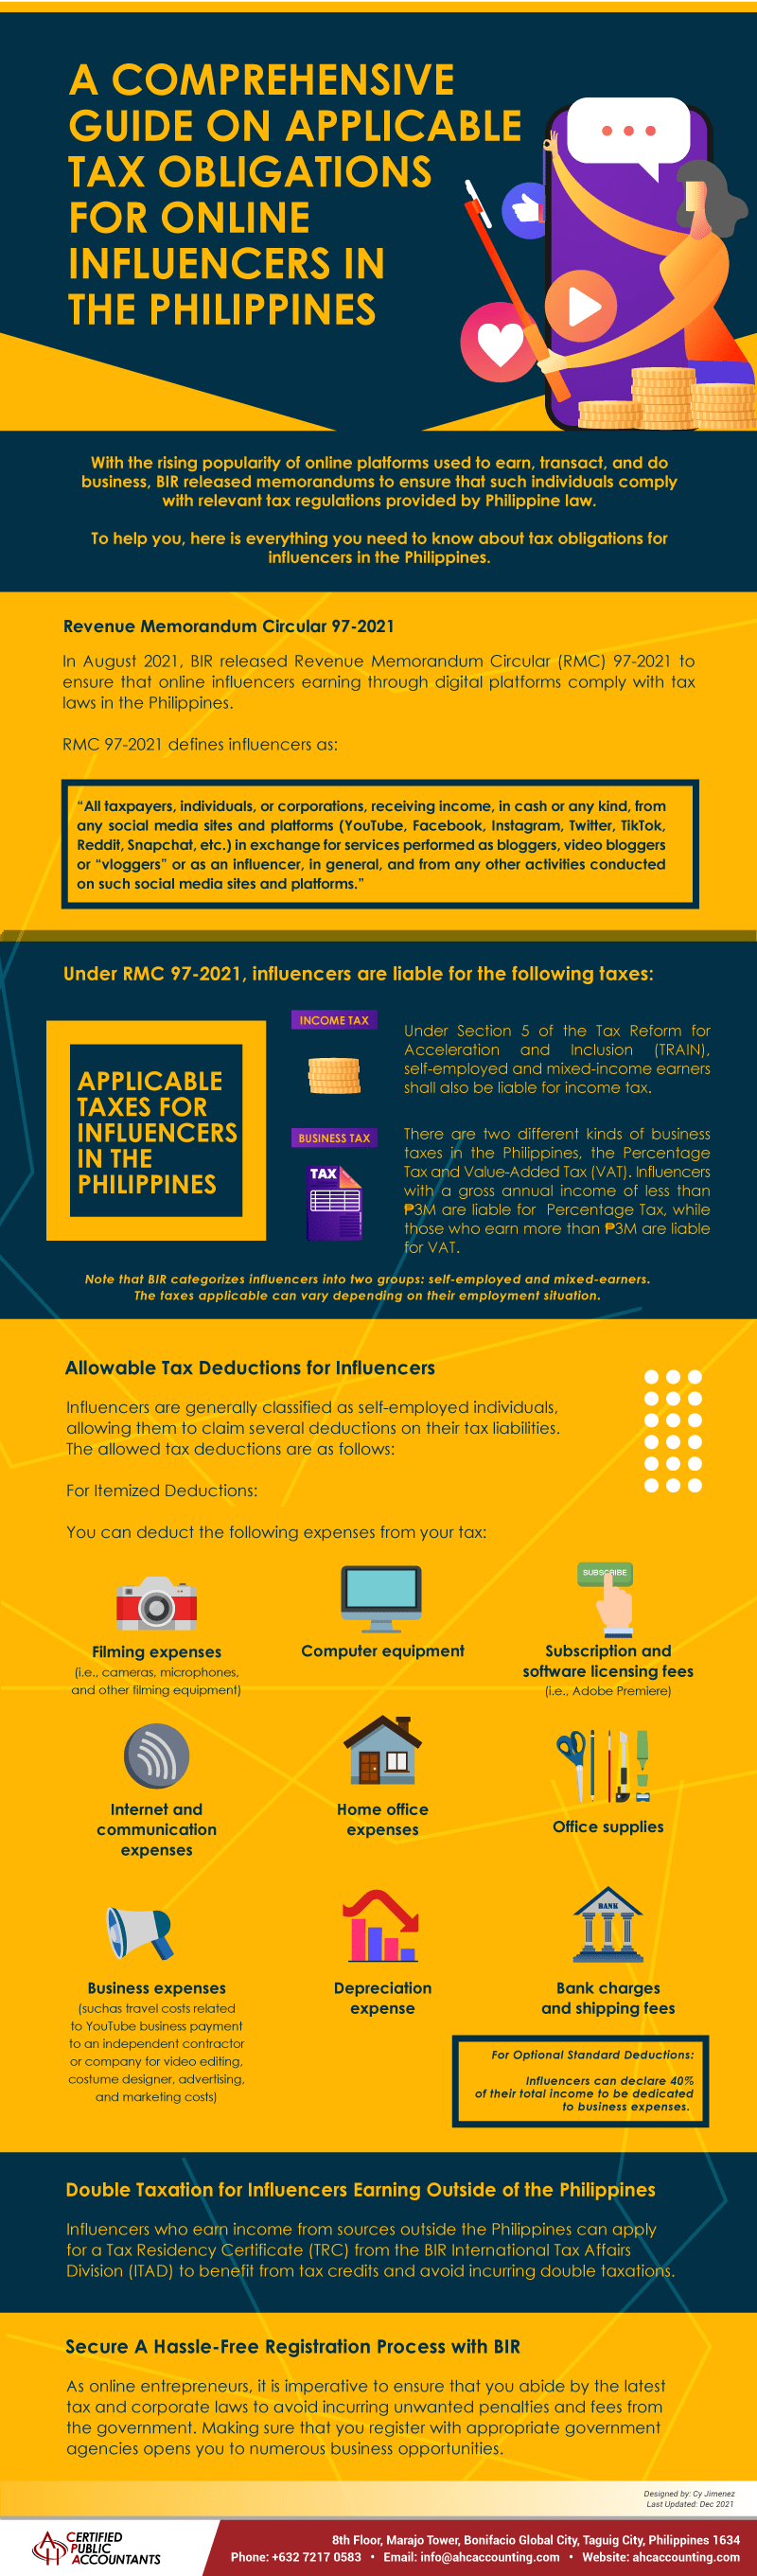 A Comprehensive Guide on Applicable Tax Obligations for Online Influencers in the Philippines [INFOGRAPHIC]